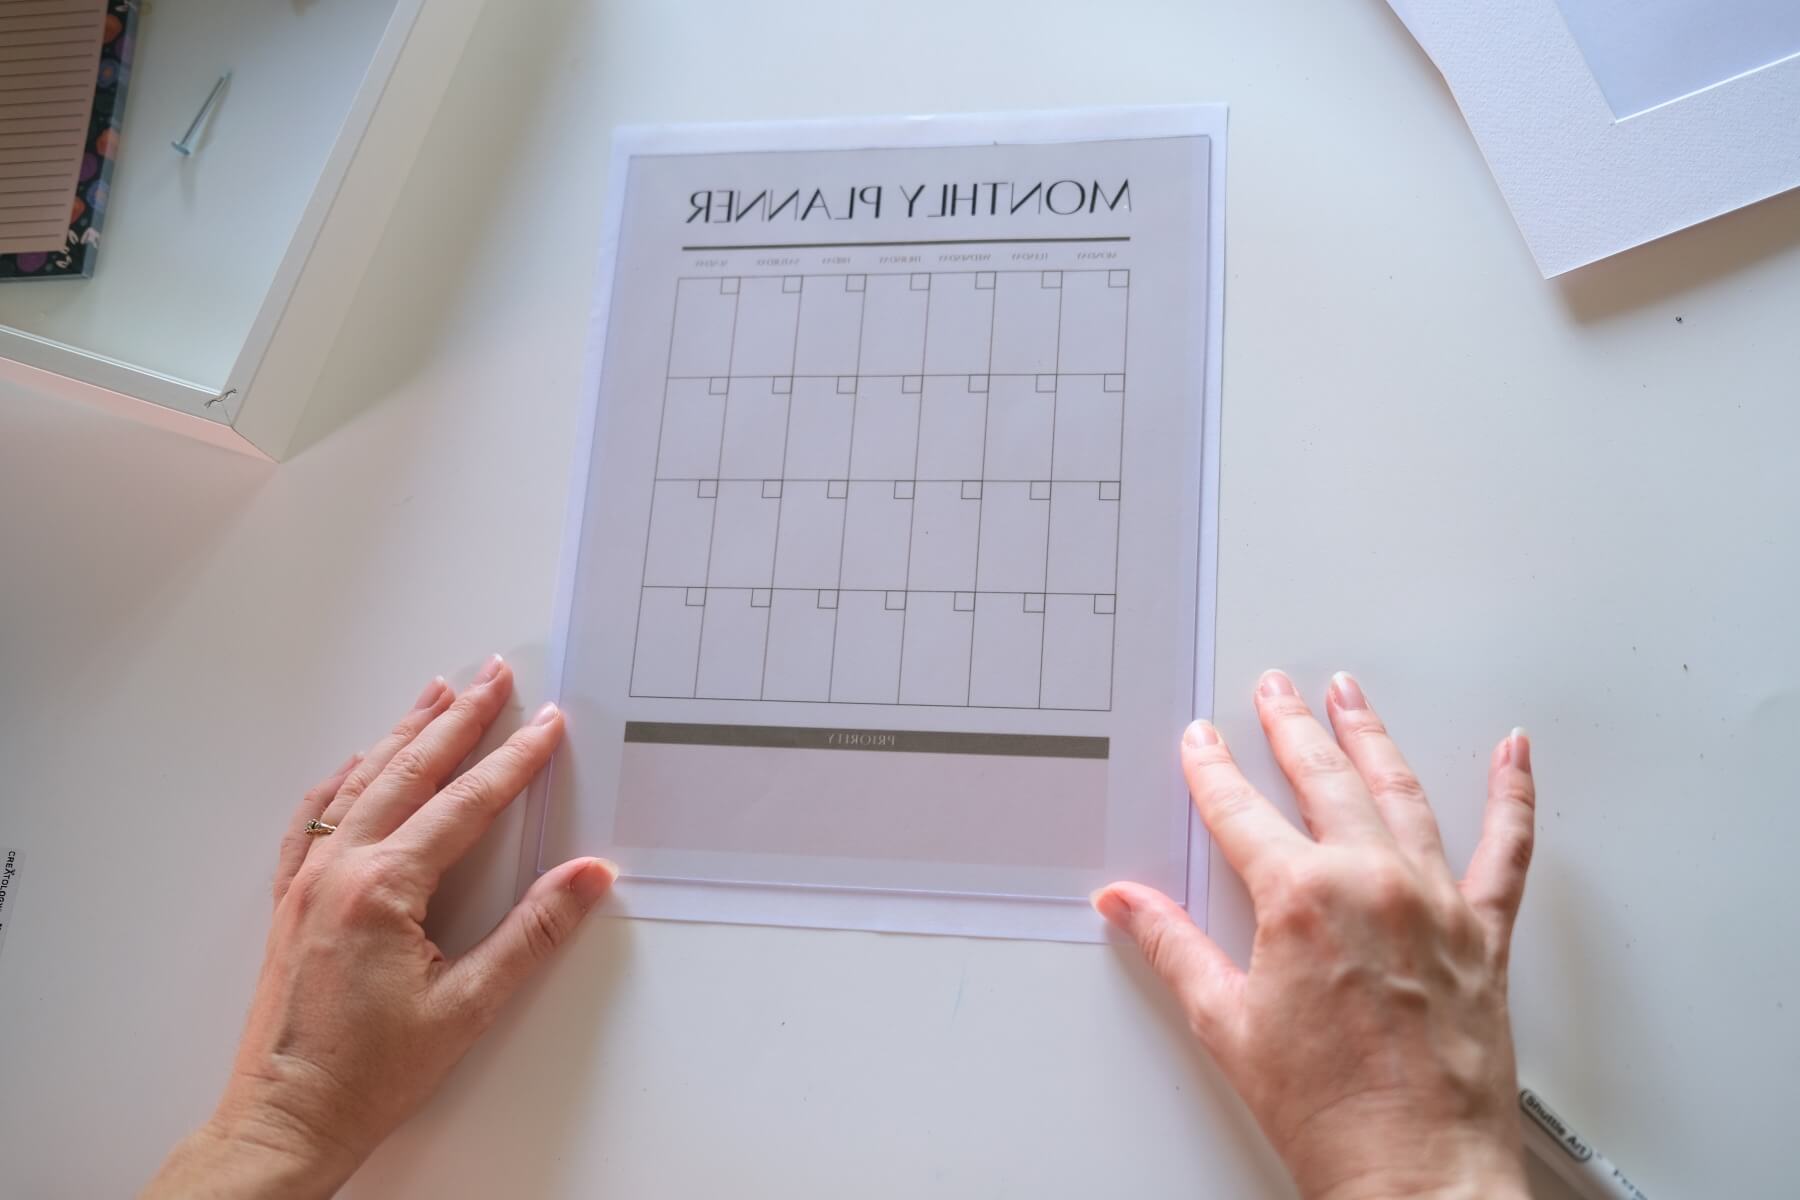 line up the glass and the calendar template